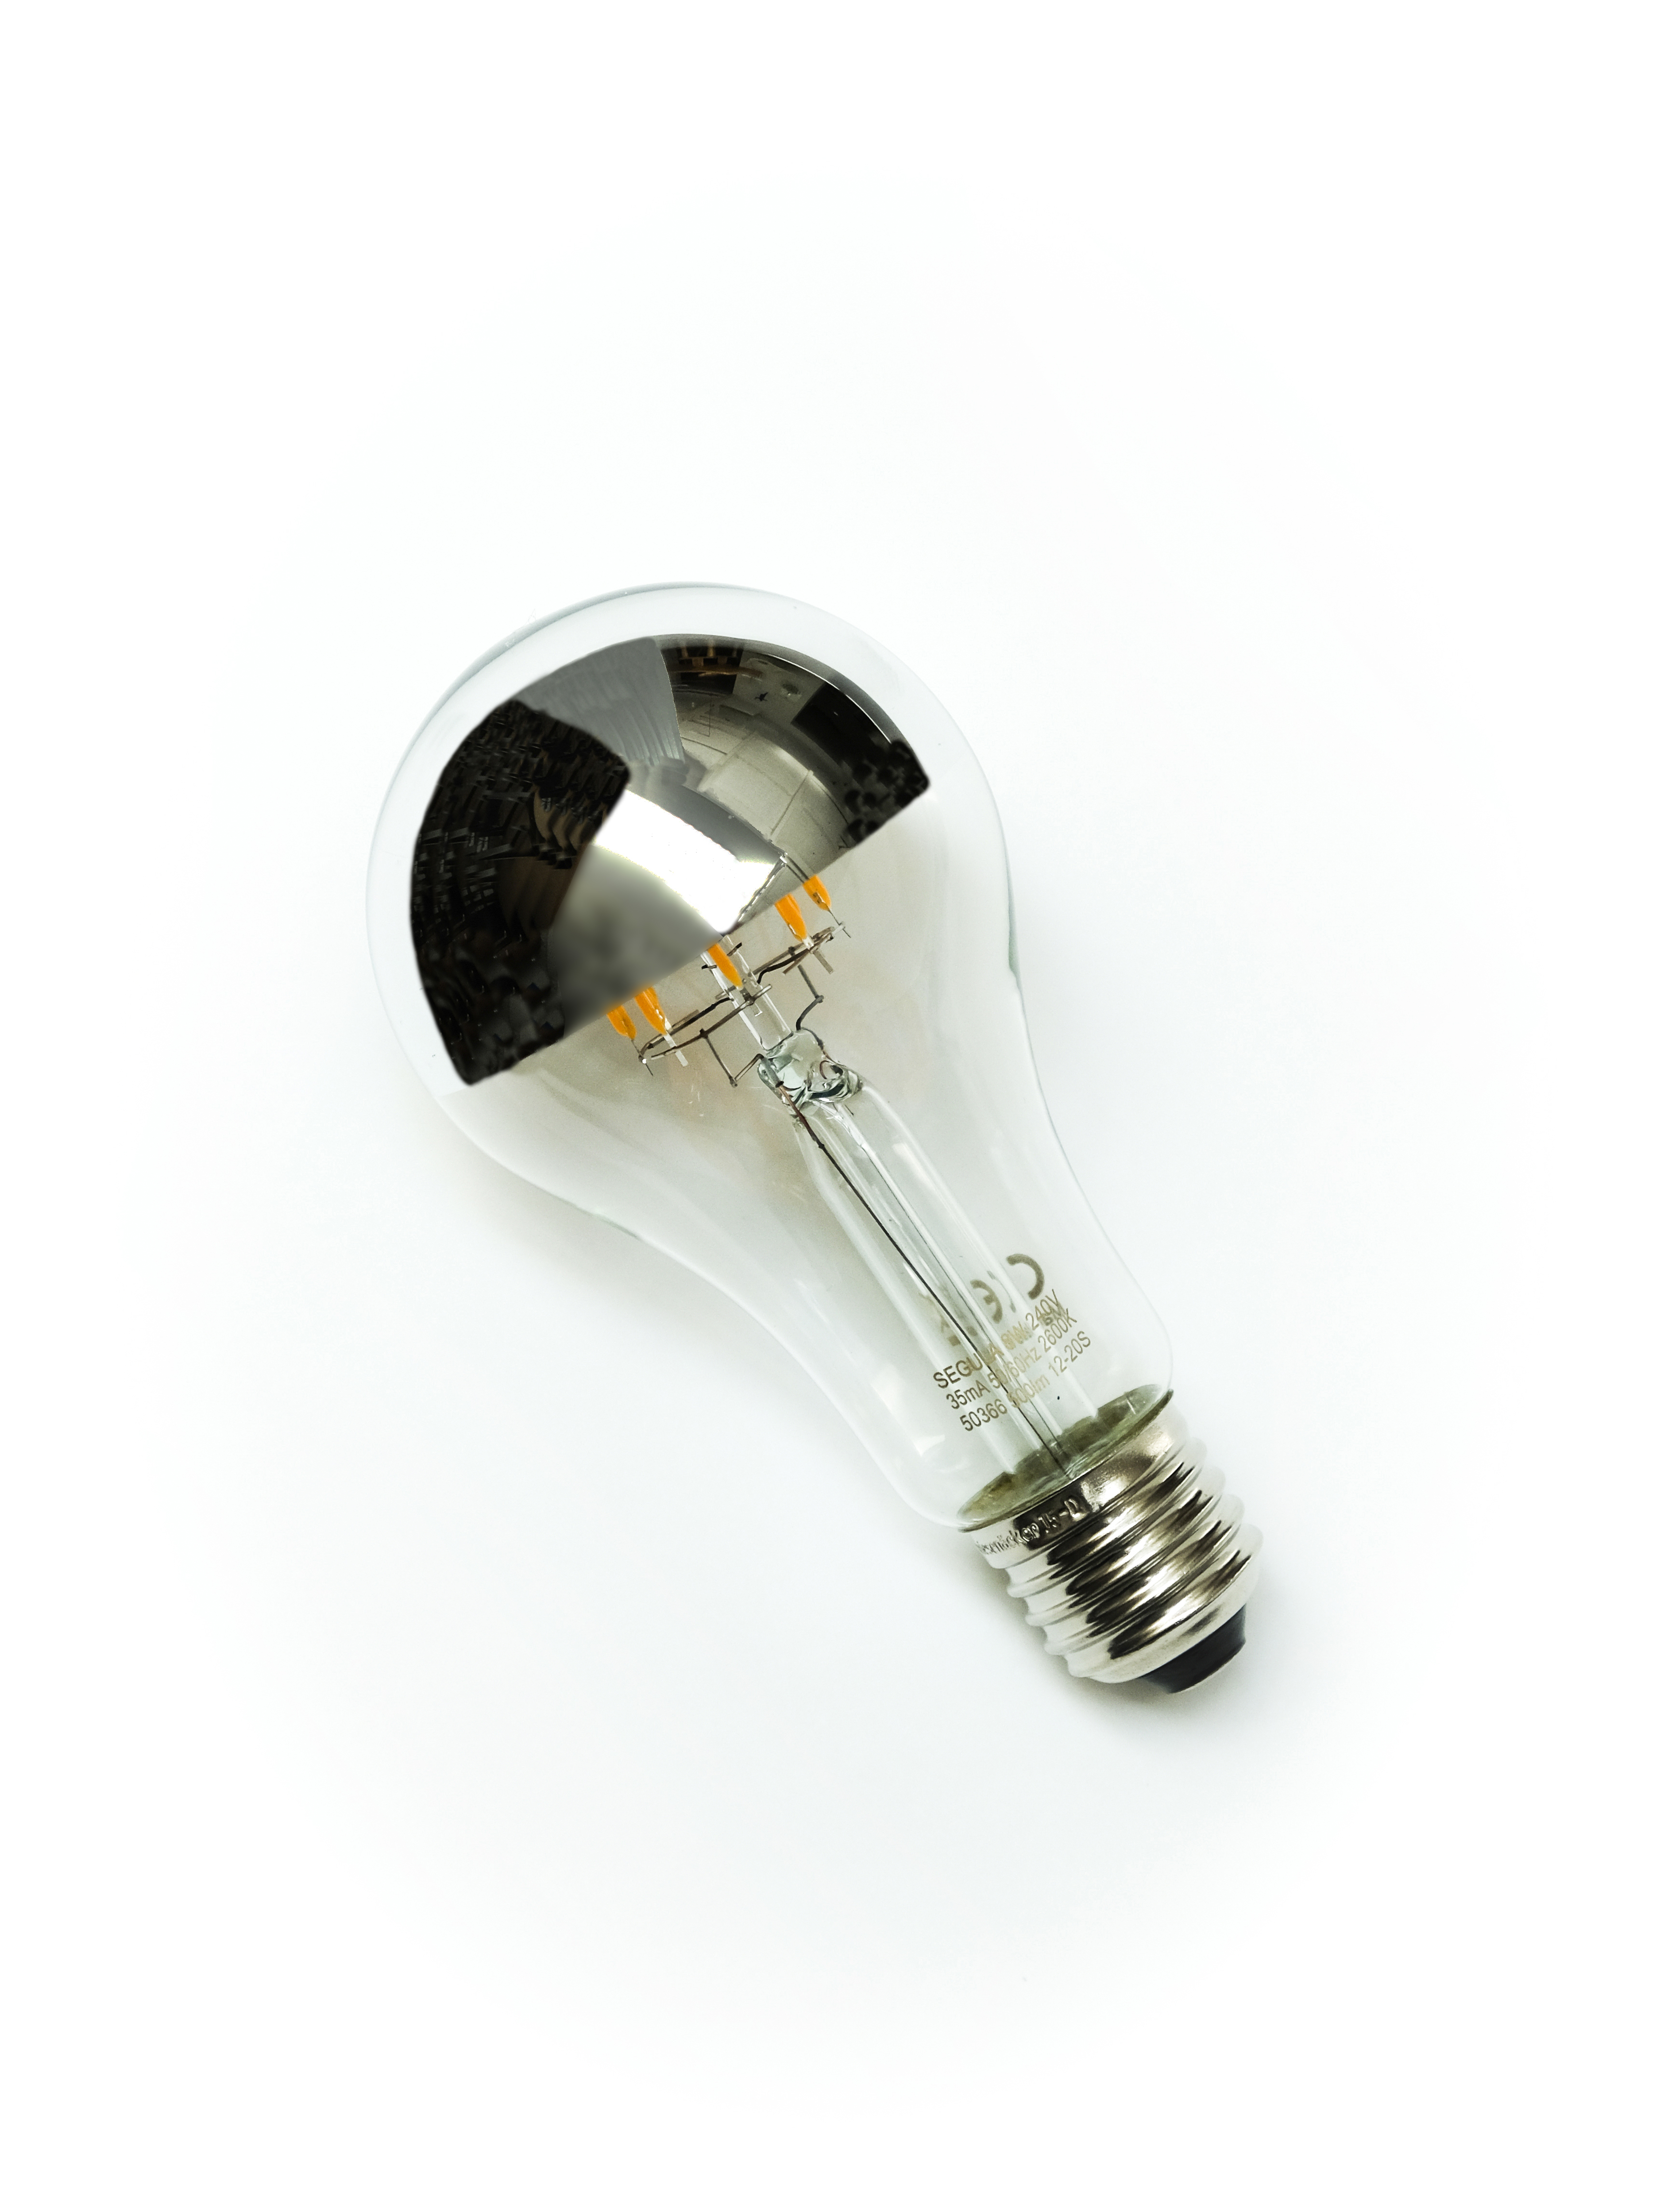 LED light source for Bulb and Bulb Brass